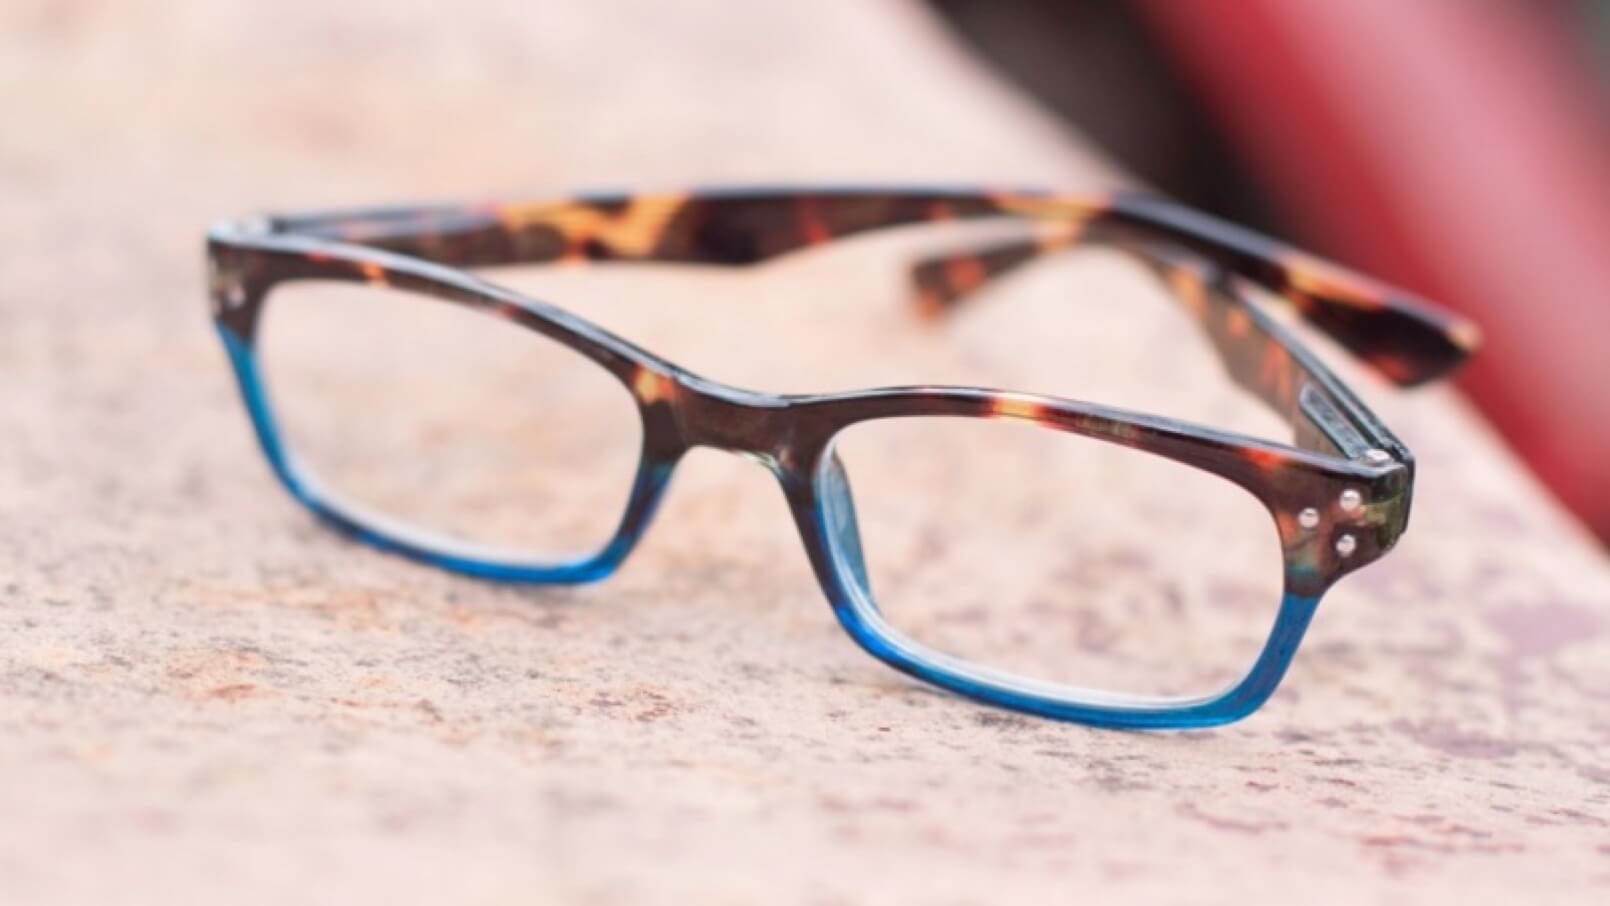 A pair of Peeper's glasses, with brown, tortoise shell frames that fade to a deep sky blue.